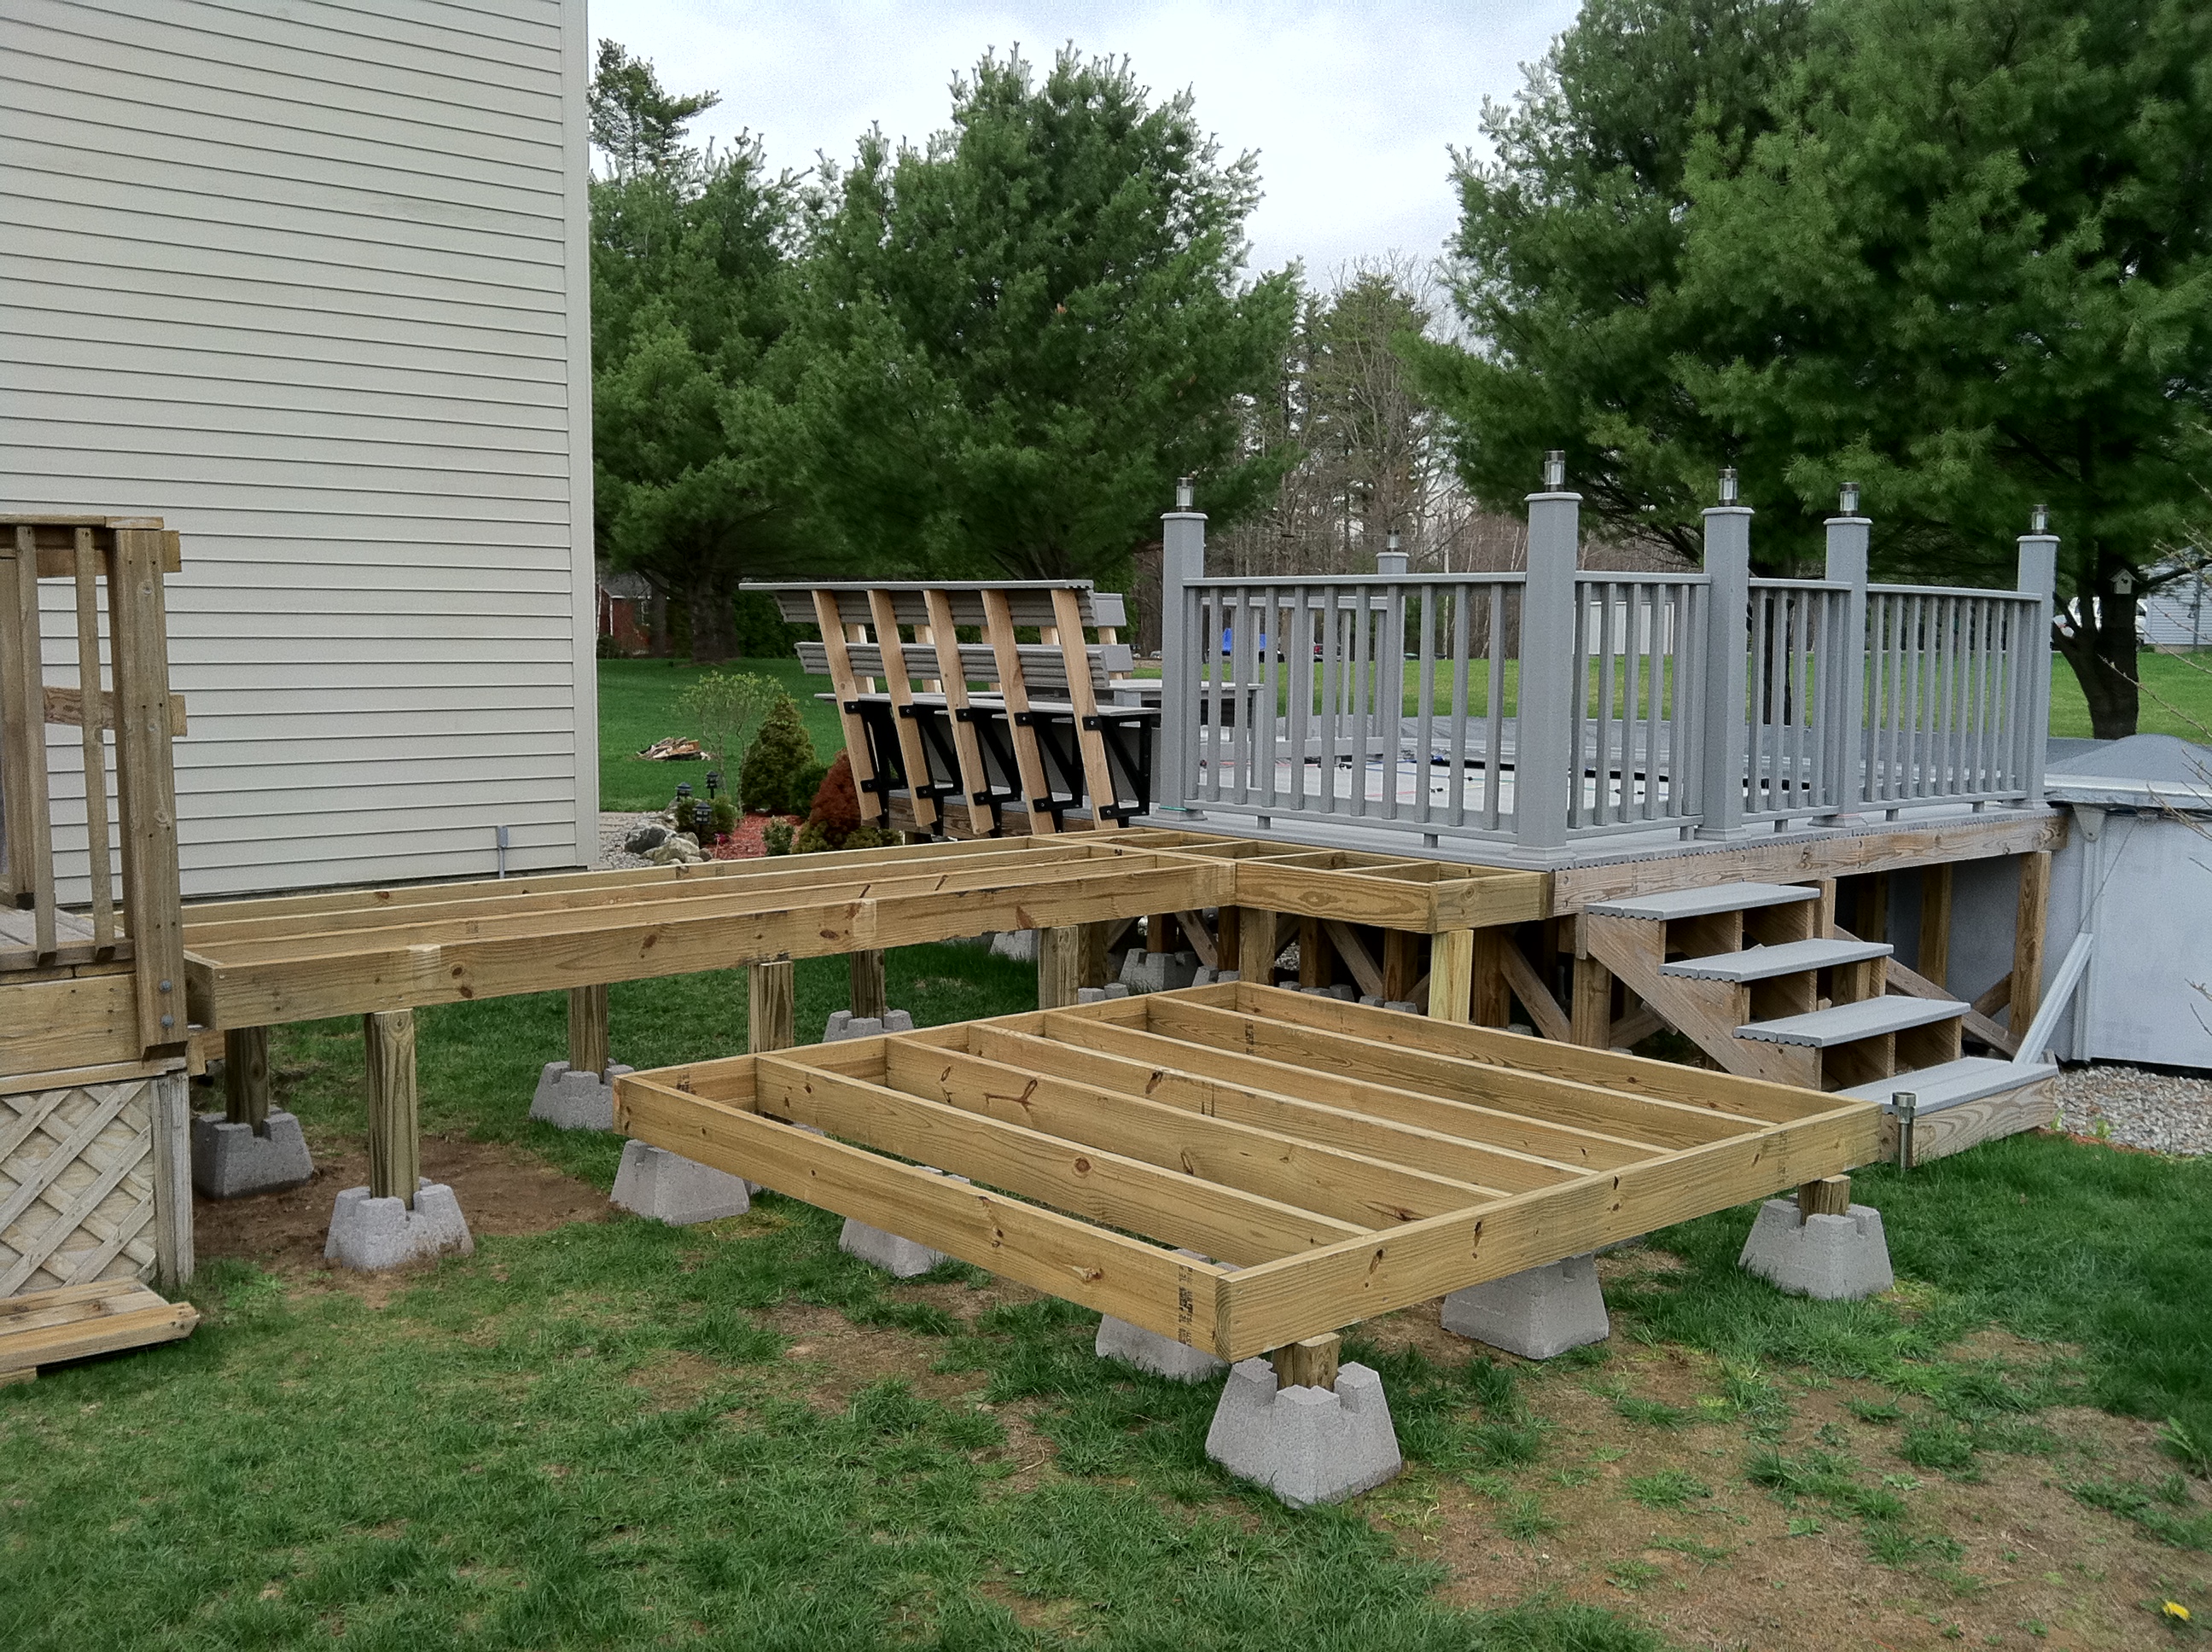 Framework for the hot tub and deck access | Repair and ...